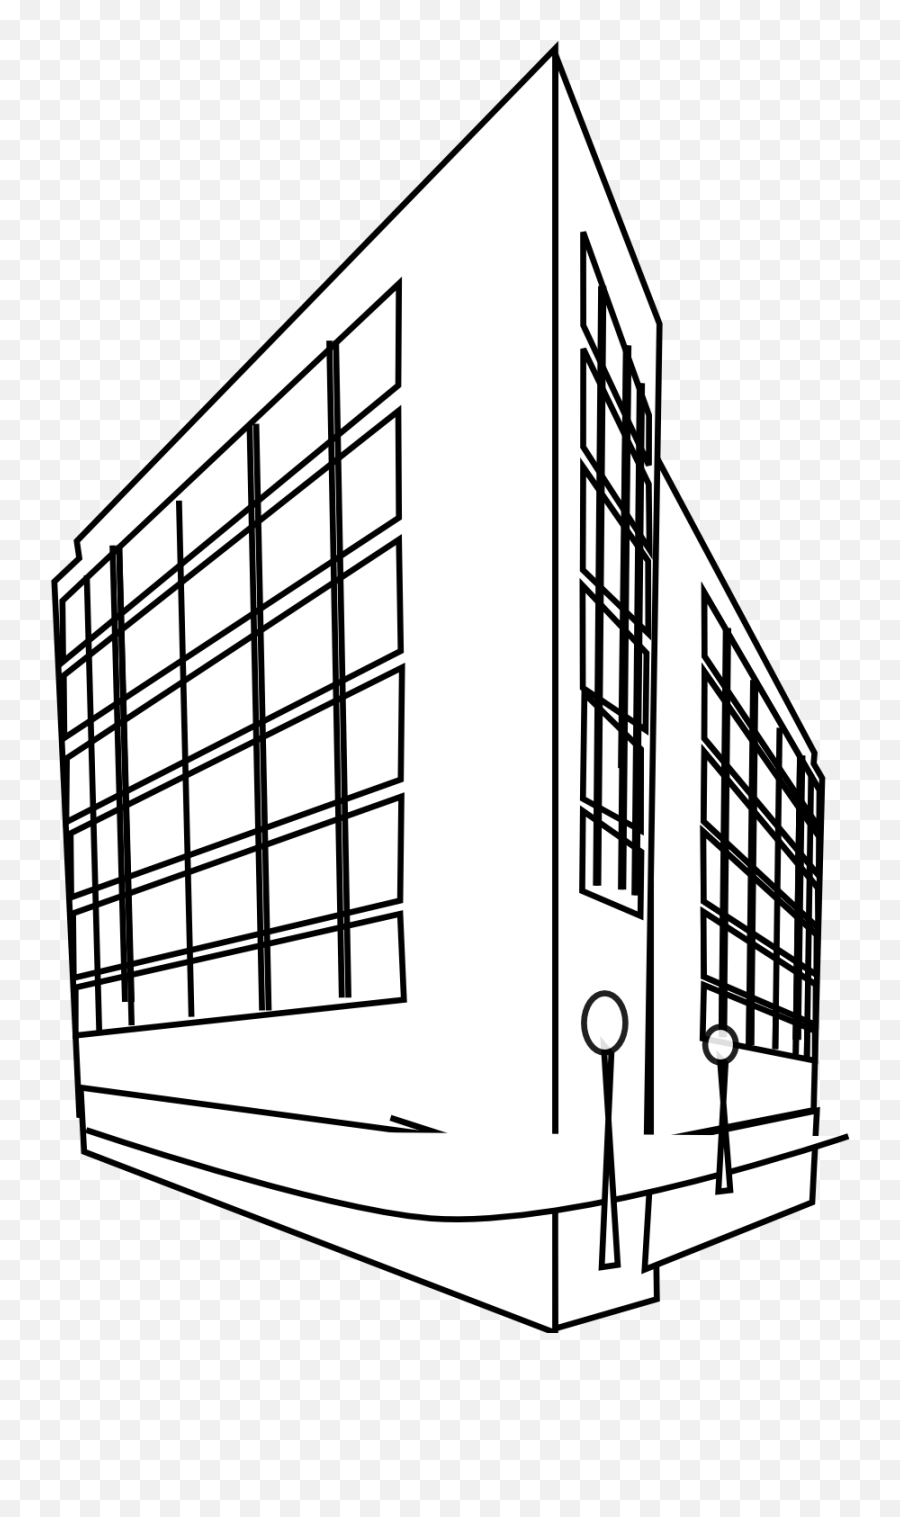 Building Clipart Black And White Free - Clipartingcom Building Clipart Black And White Free Emoji,Building Clipart